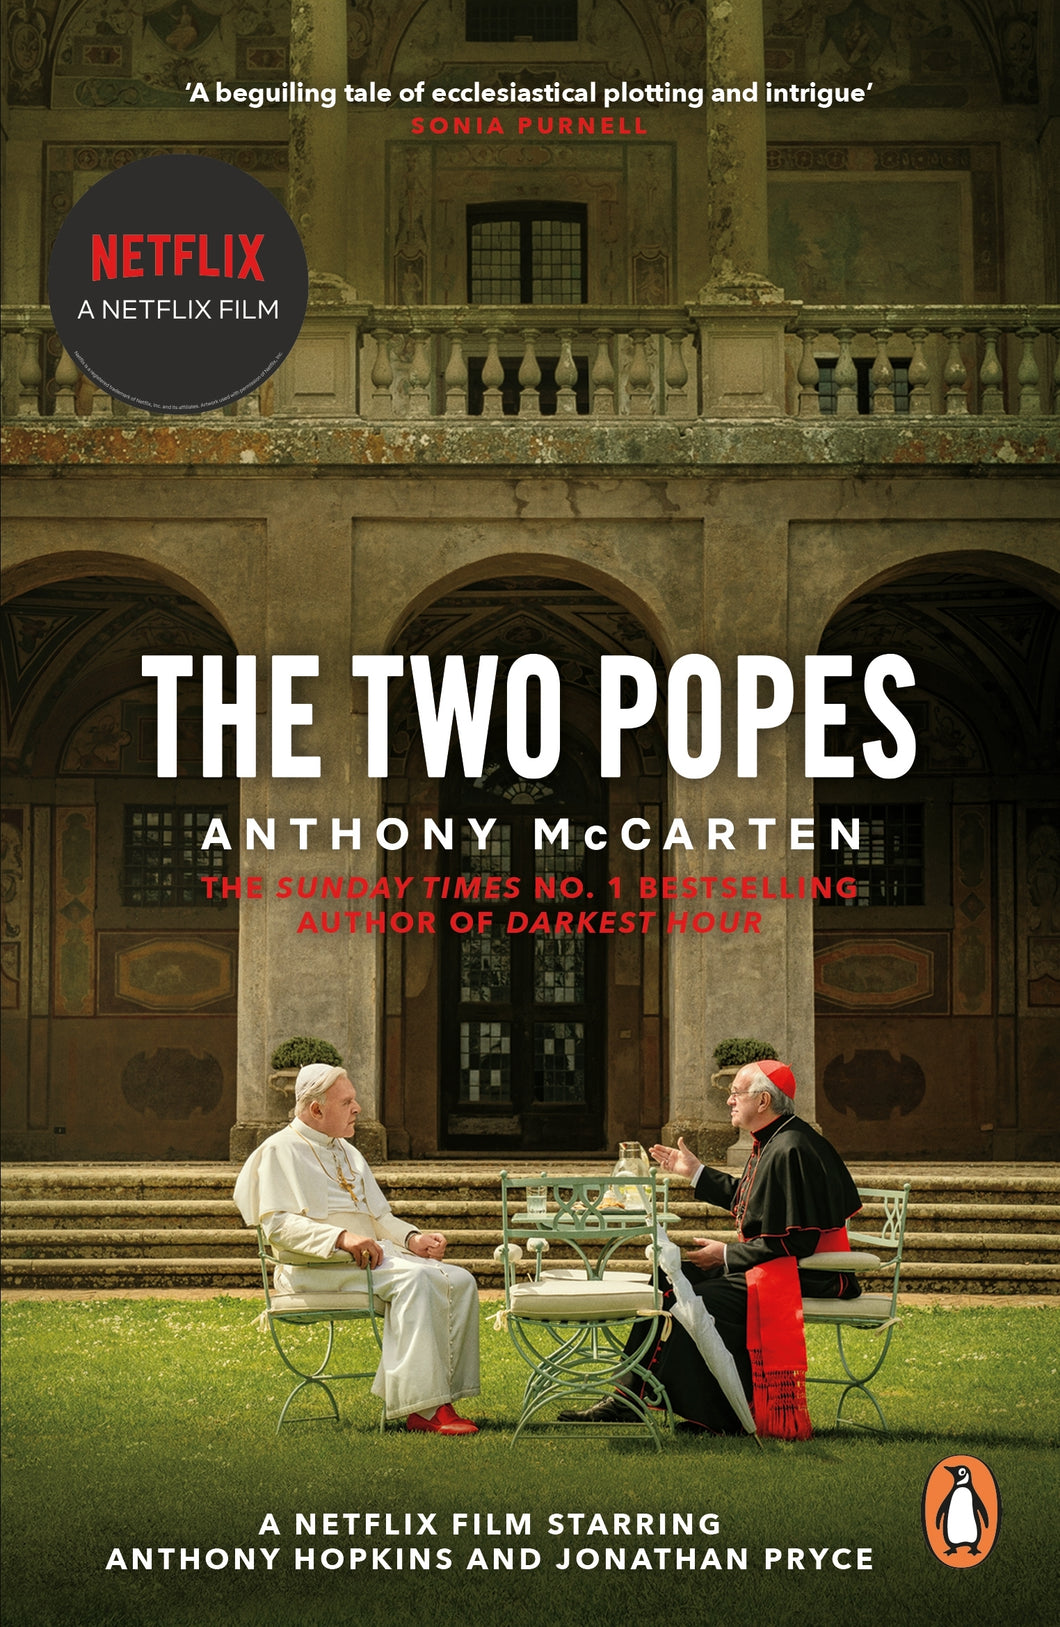 The Two Popes by Anthony McCarten: stock image of front cover.